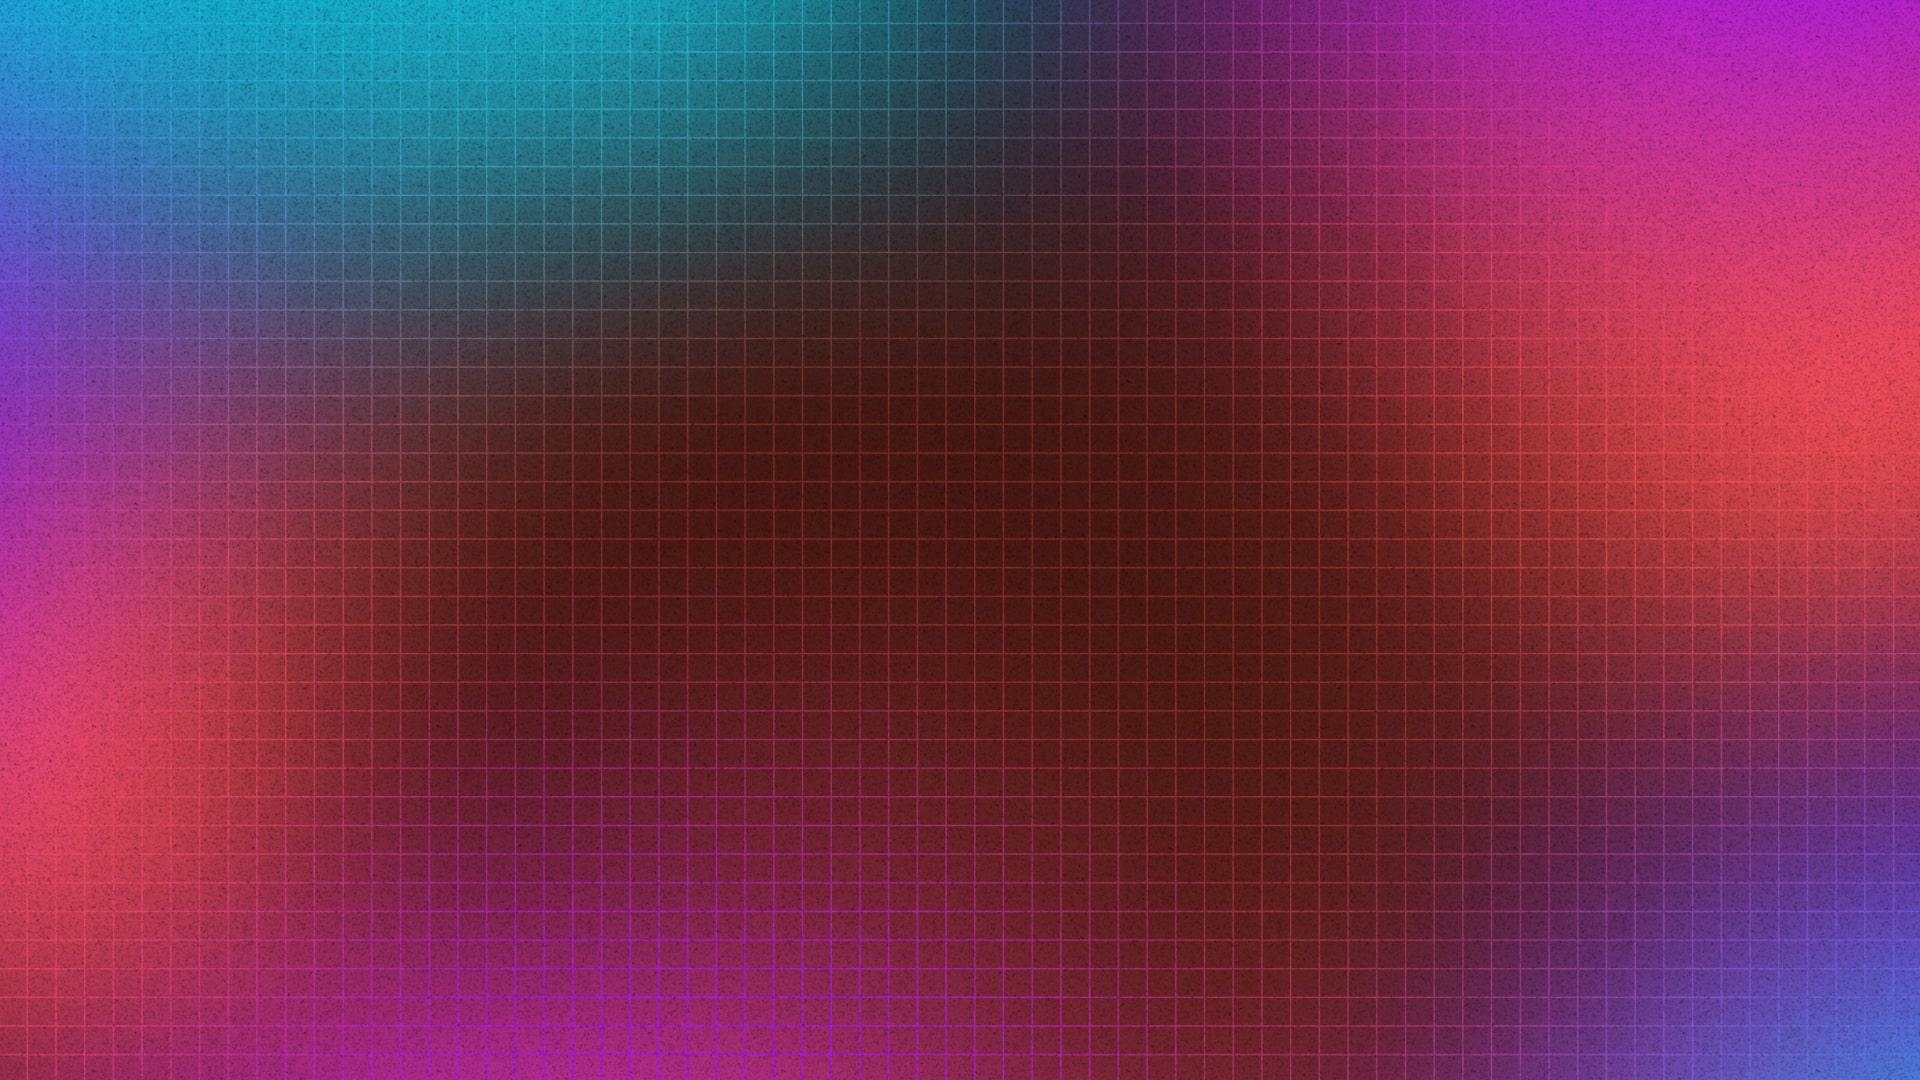 Grid background with abstract blue and pink hues